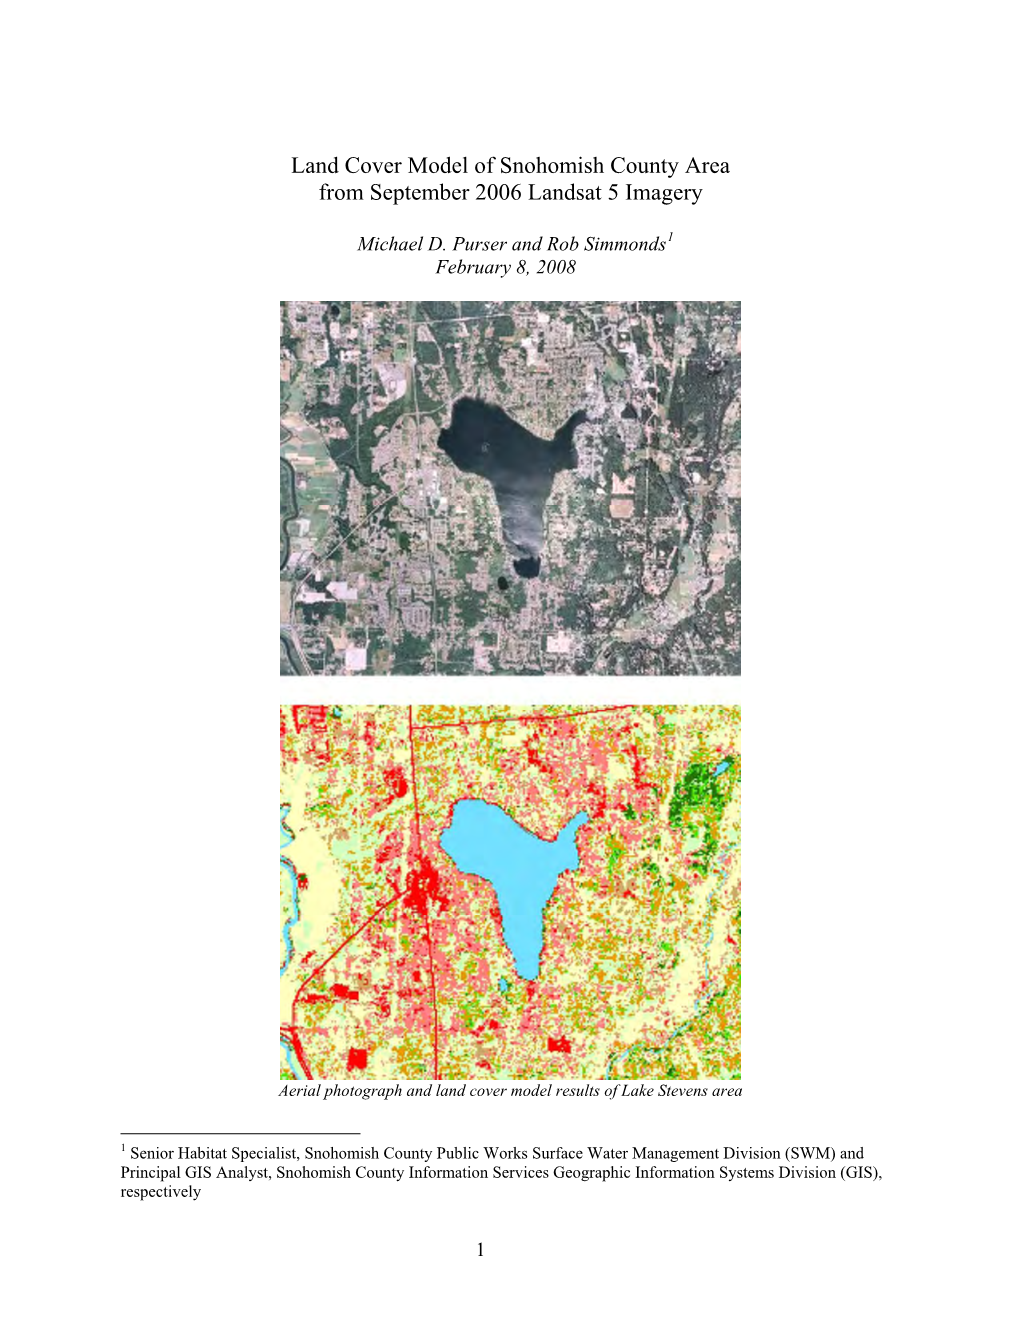 Land Cover Model of Snohomish County Area from September 2006 Landsat 5 Imagery